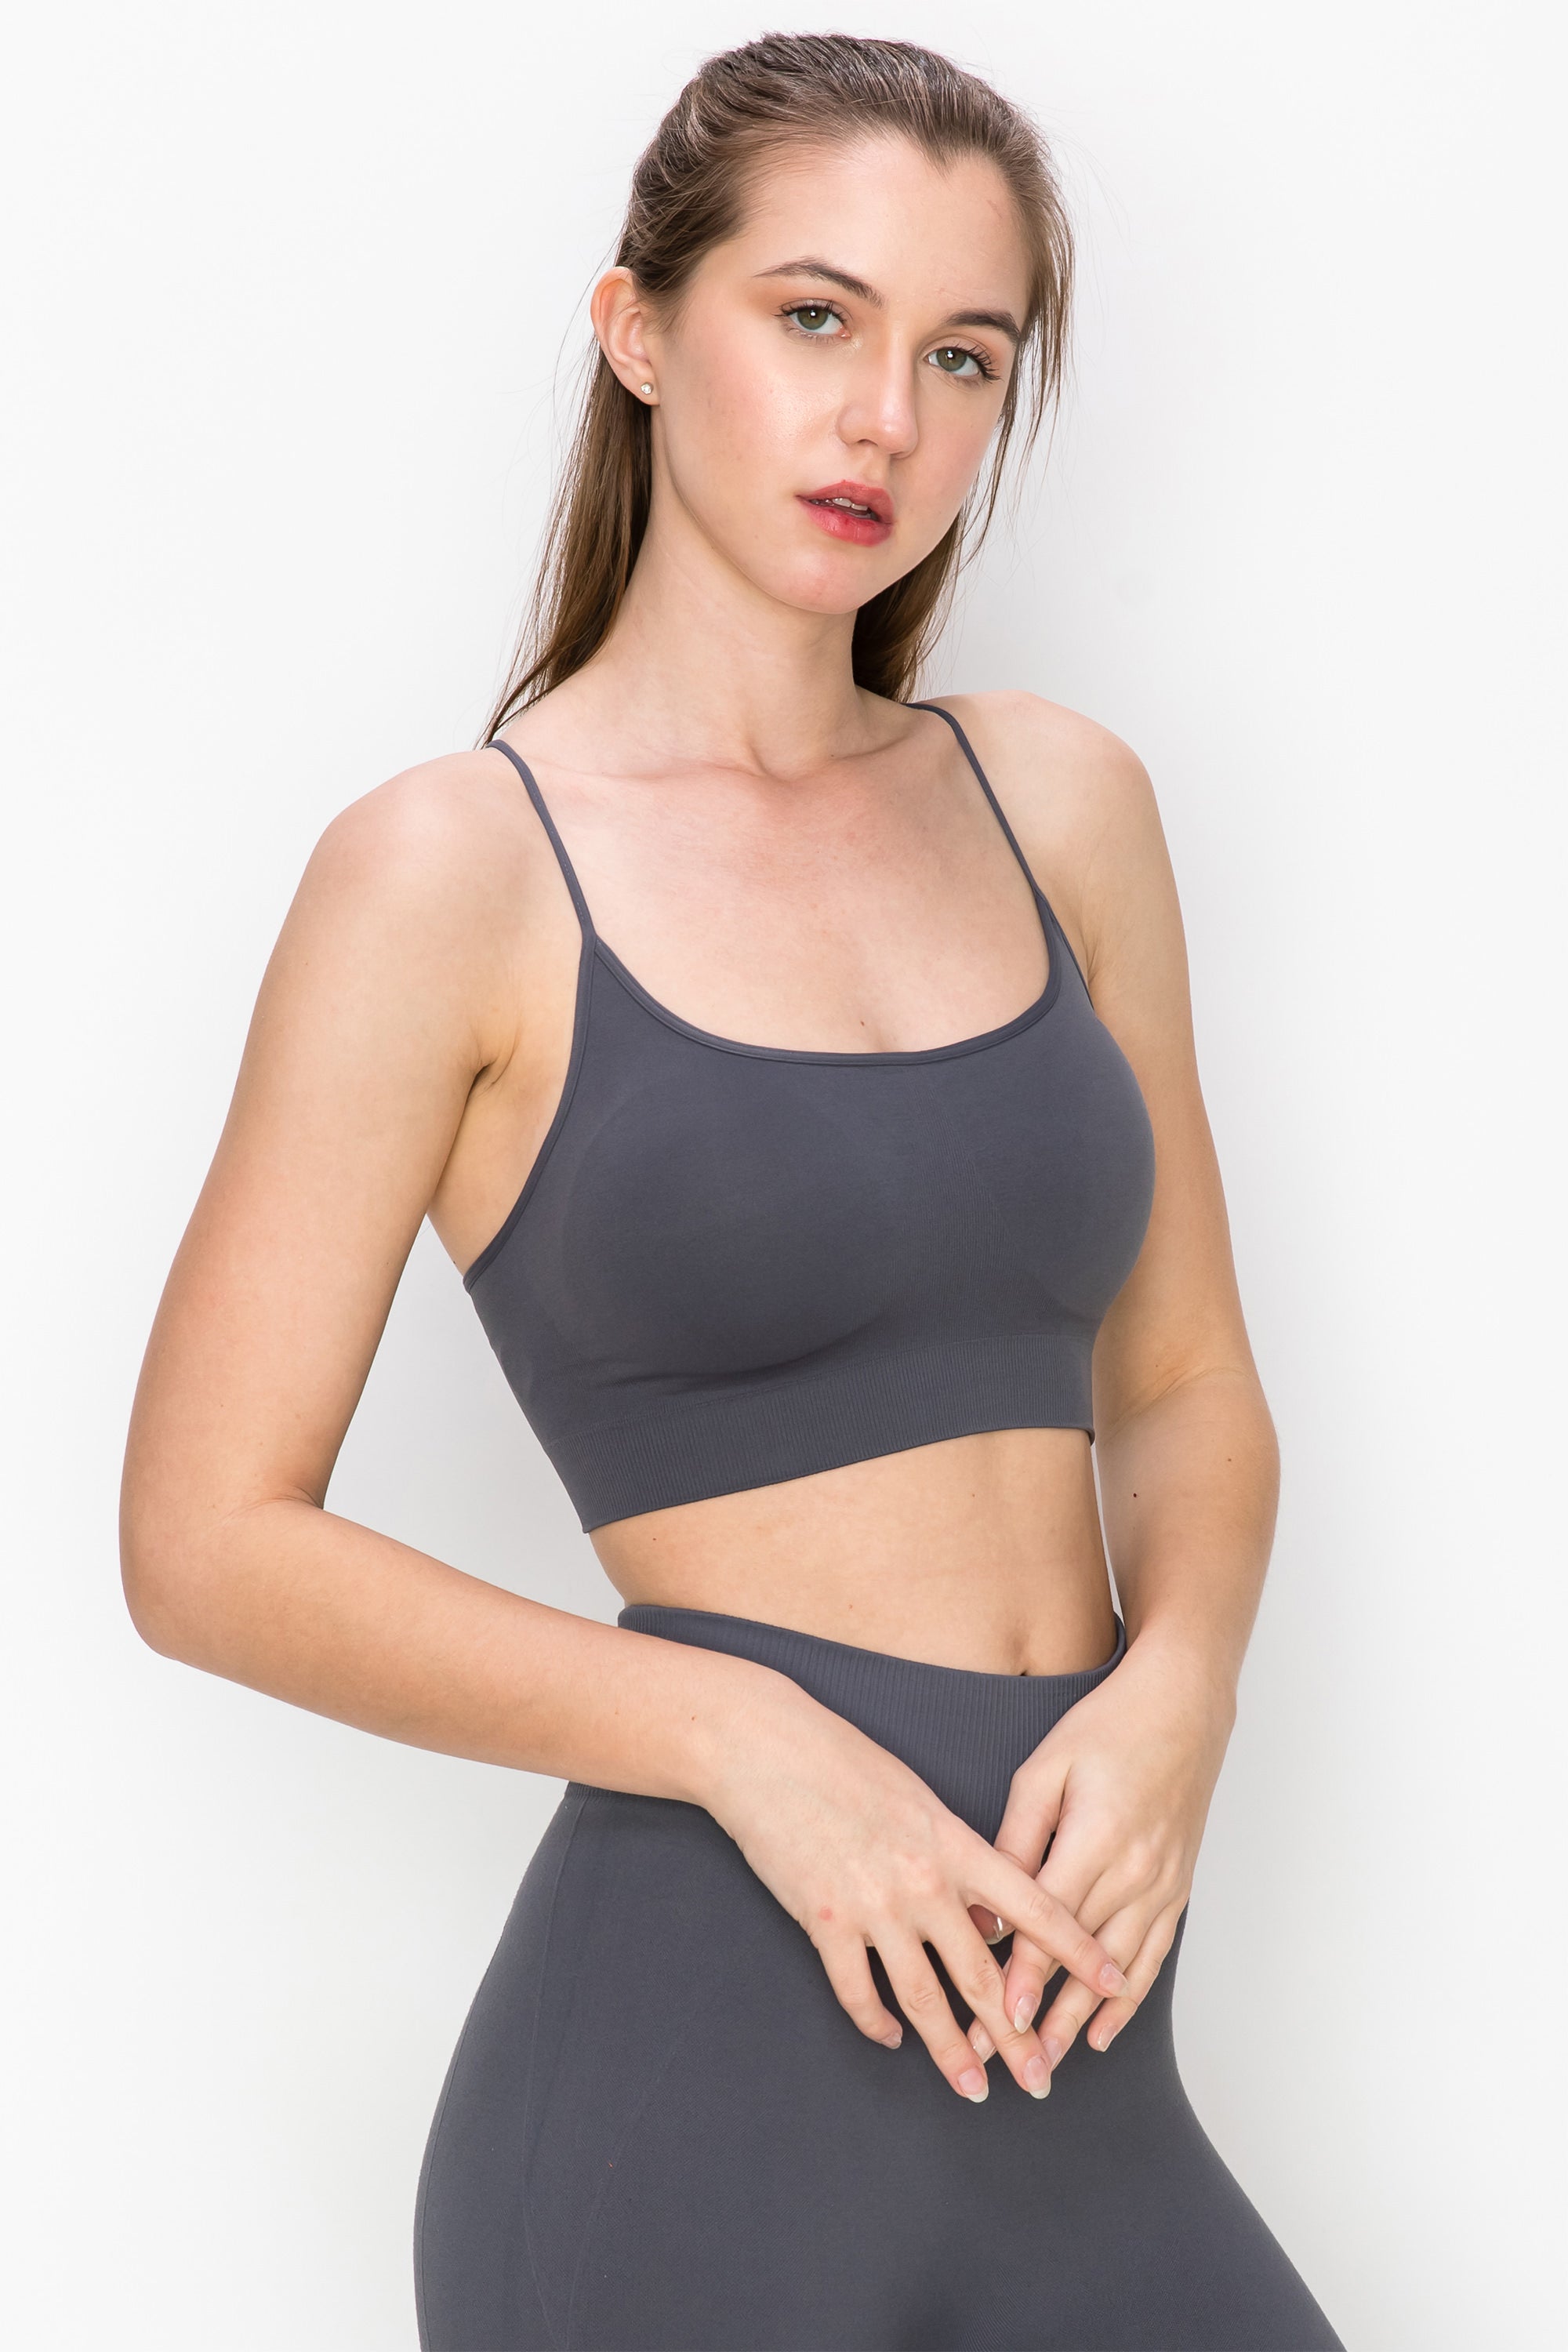 Shop for Padded Double Straps Strappy Sporty Bra ARMY GREEN